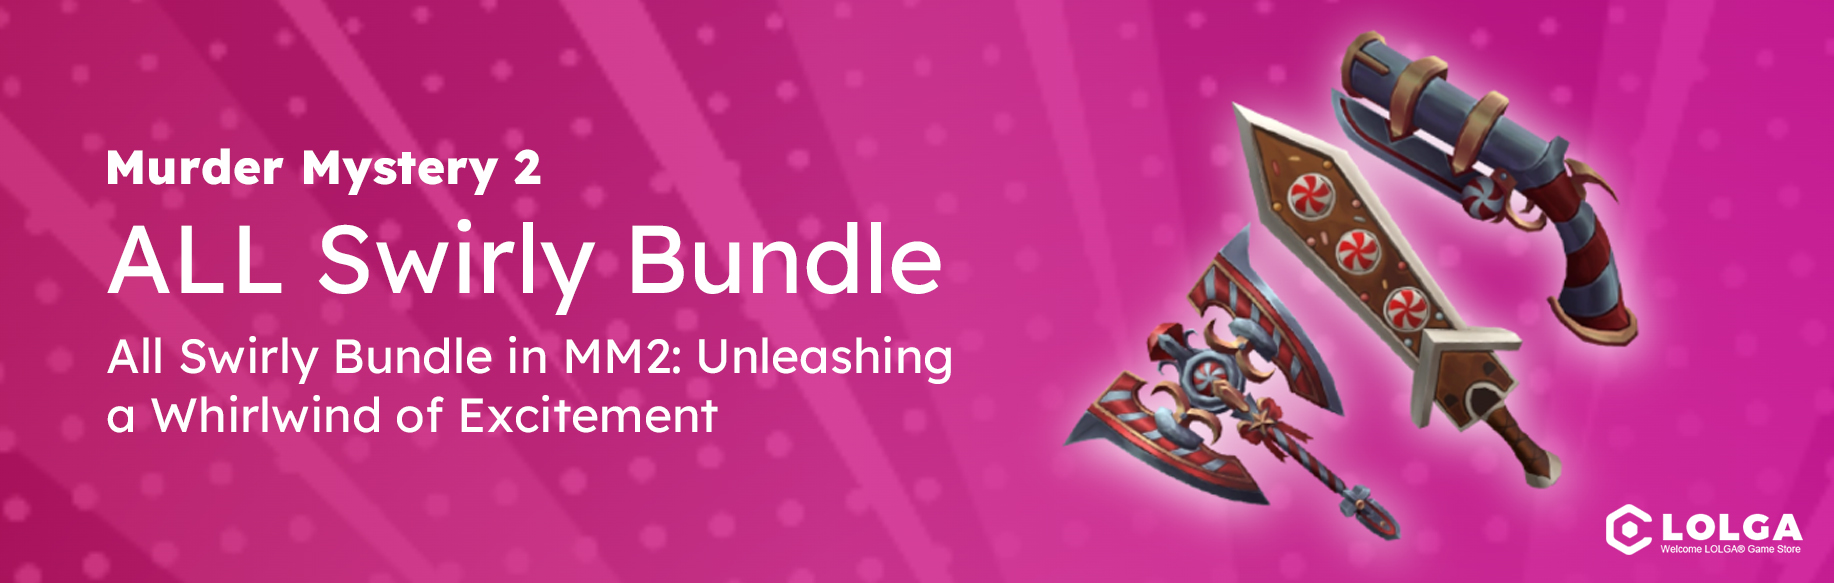 All Swirly Bundle in MM2: Unleashing a Whirlwind of Excitement